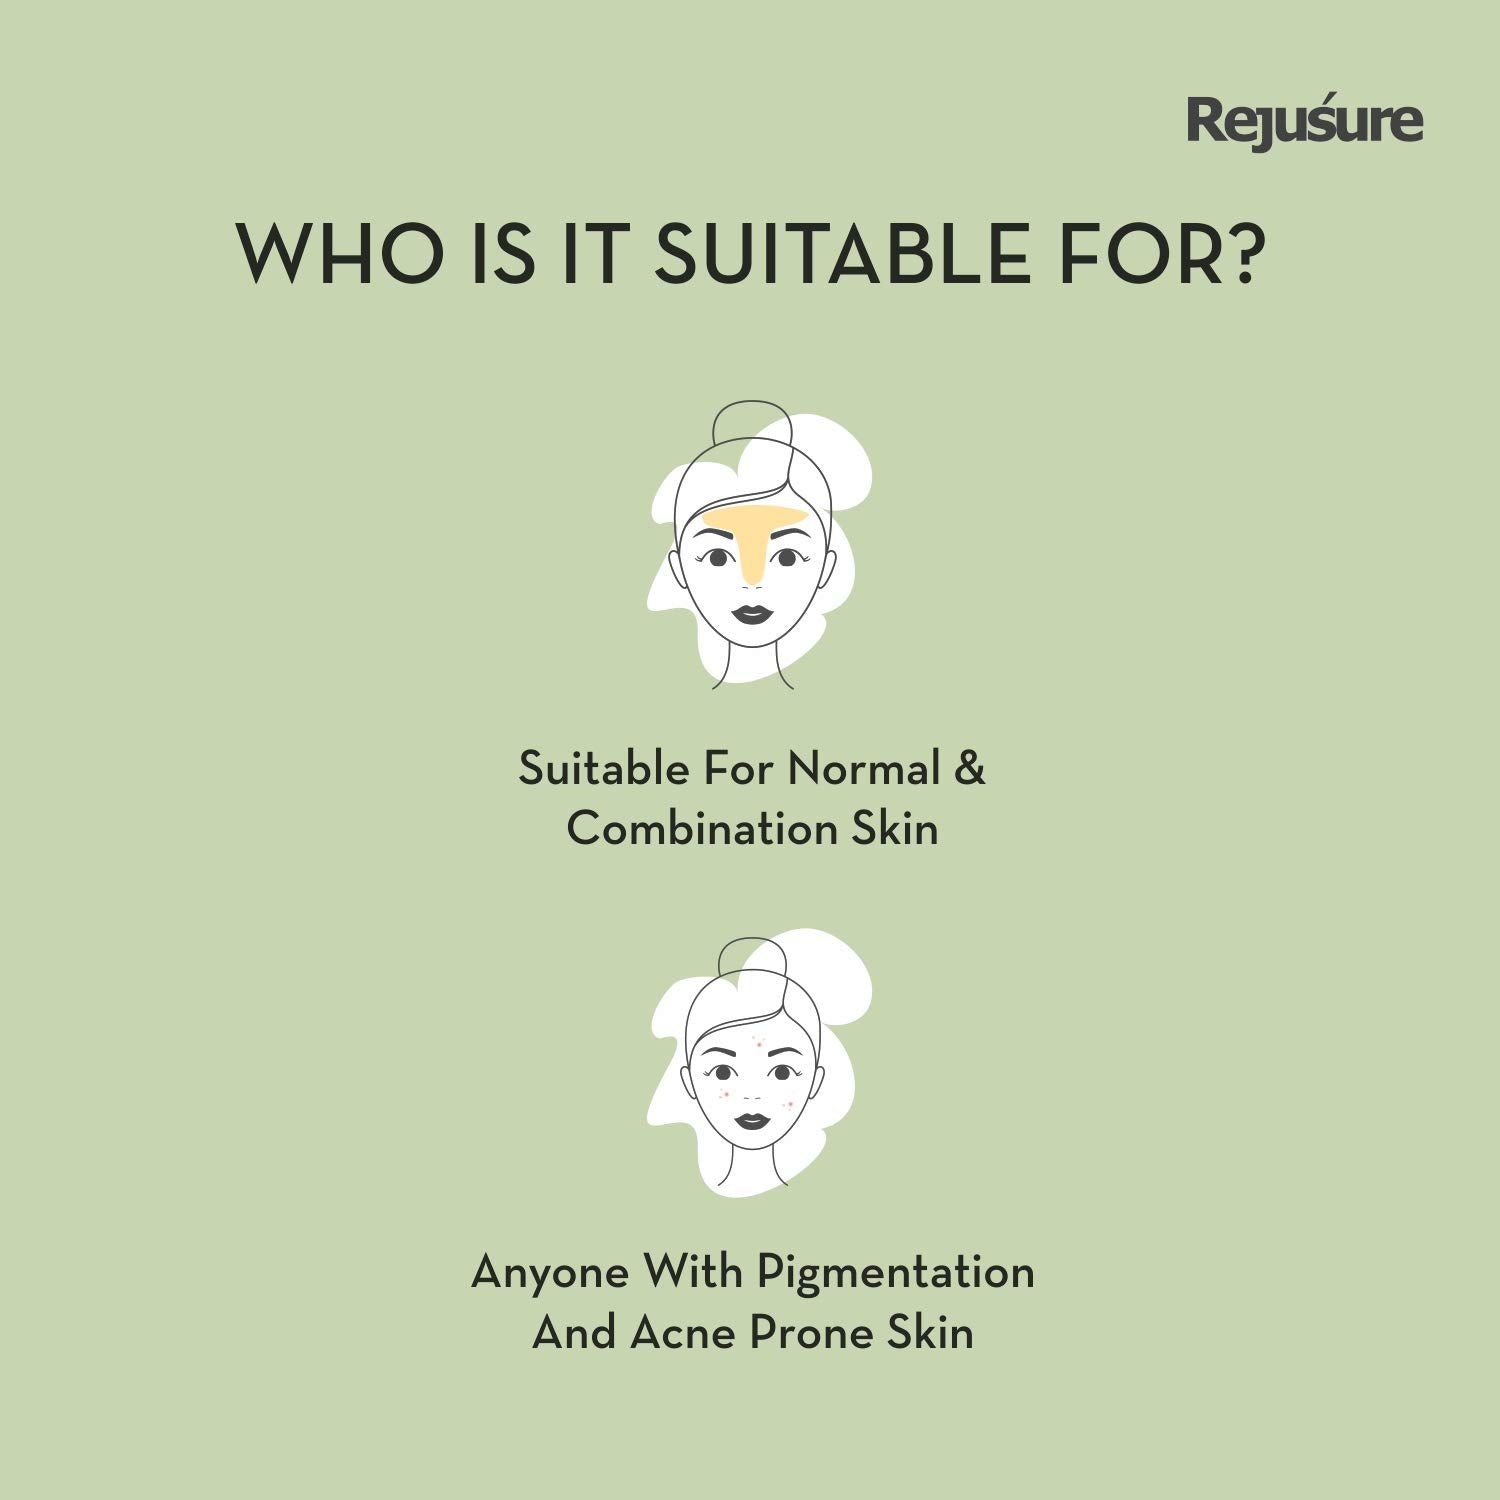 Rejusure AHA 0.5% + BHA 0.5% Facial Moisturizer for Active Acne, Clears Pores, Fights Blemishes & Exfoliates – 50ml (Pack of 5)